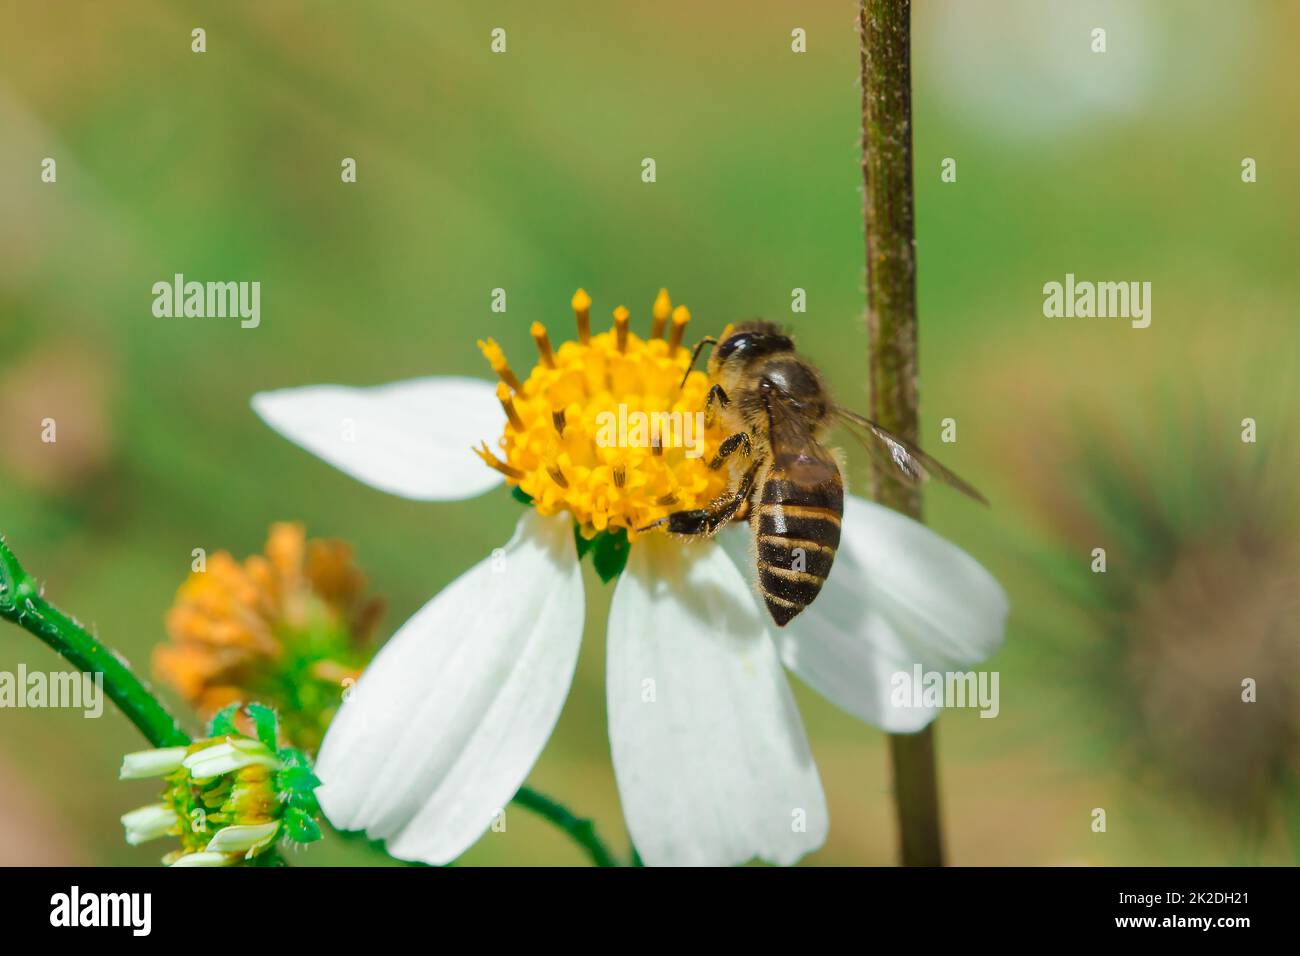 The bees are on Bidens pilosa that is blooming in nature. Stock Photo